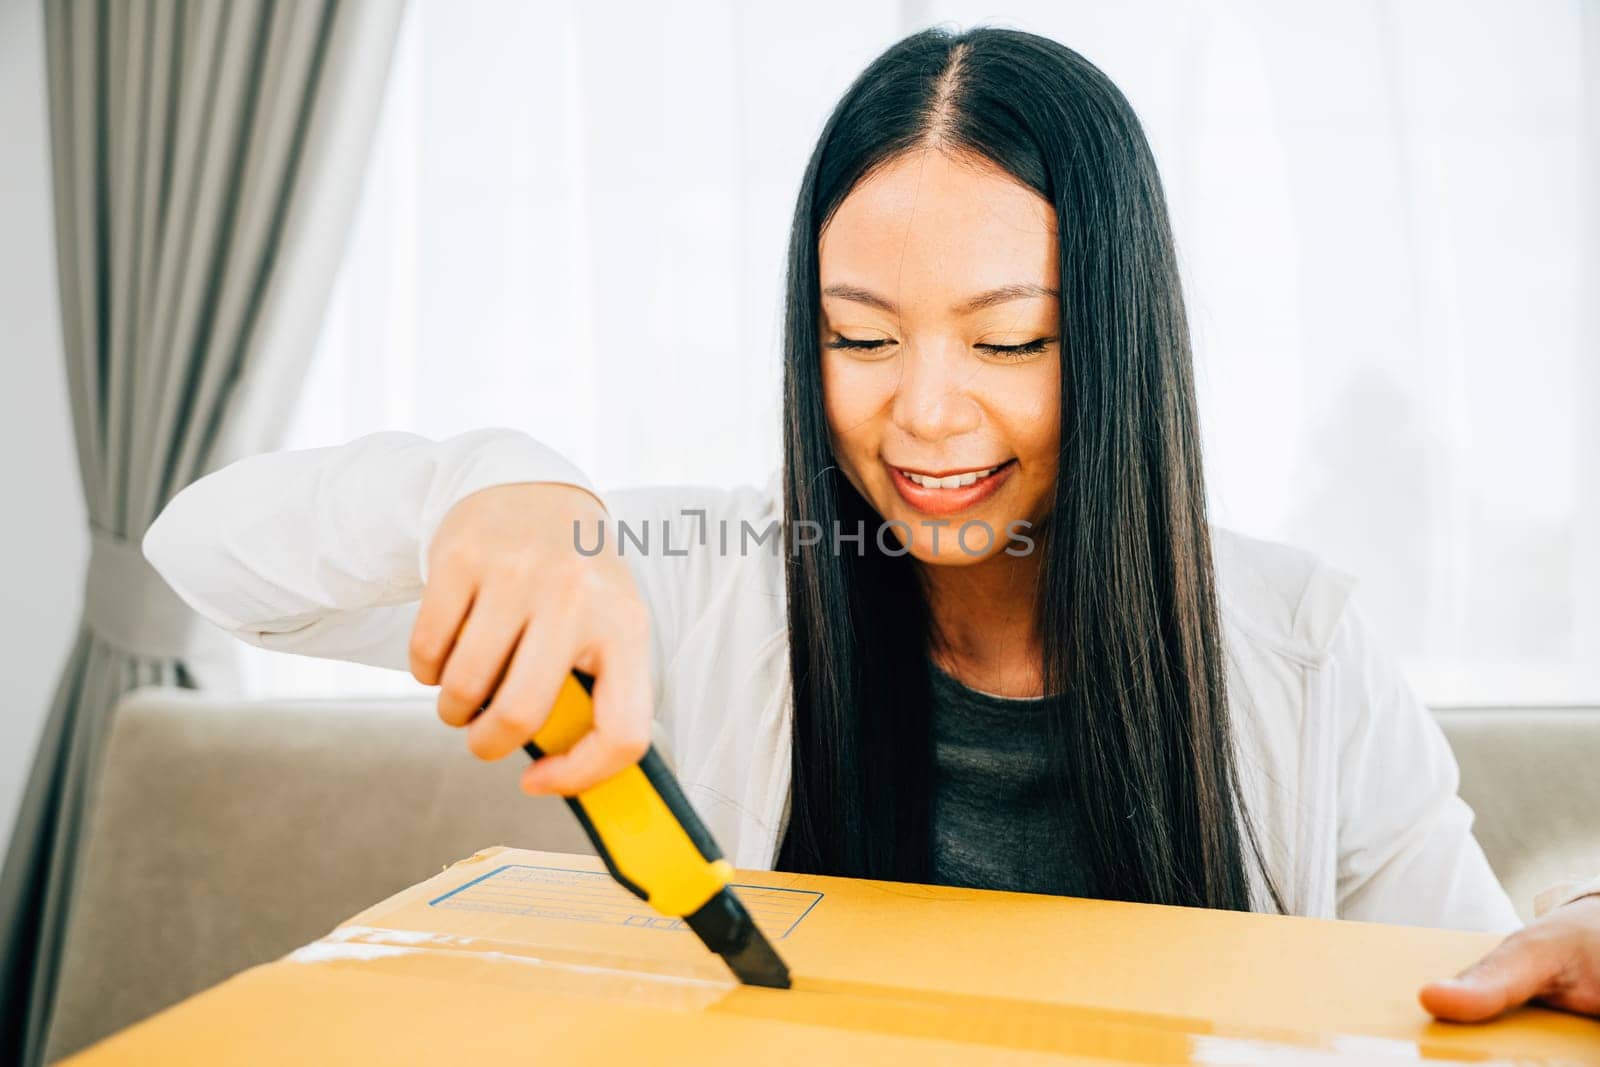 A woman holds a utility cutter for precision unboxing revealing online shopping contents by Sorapop